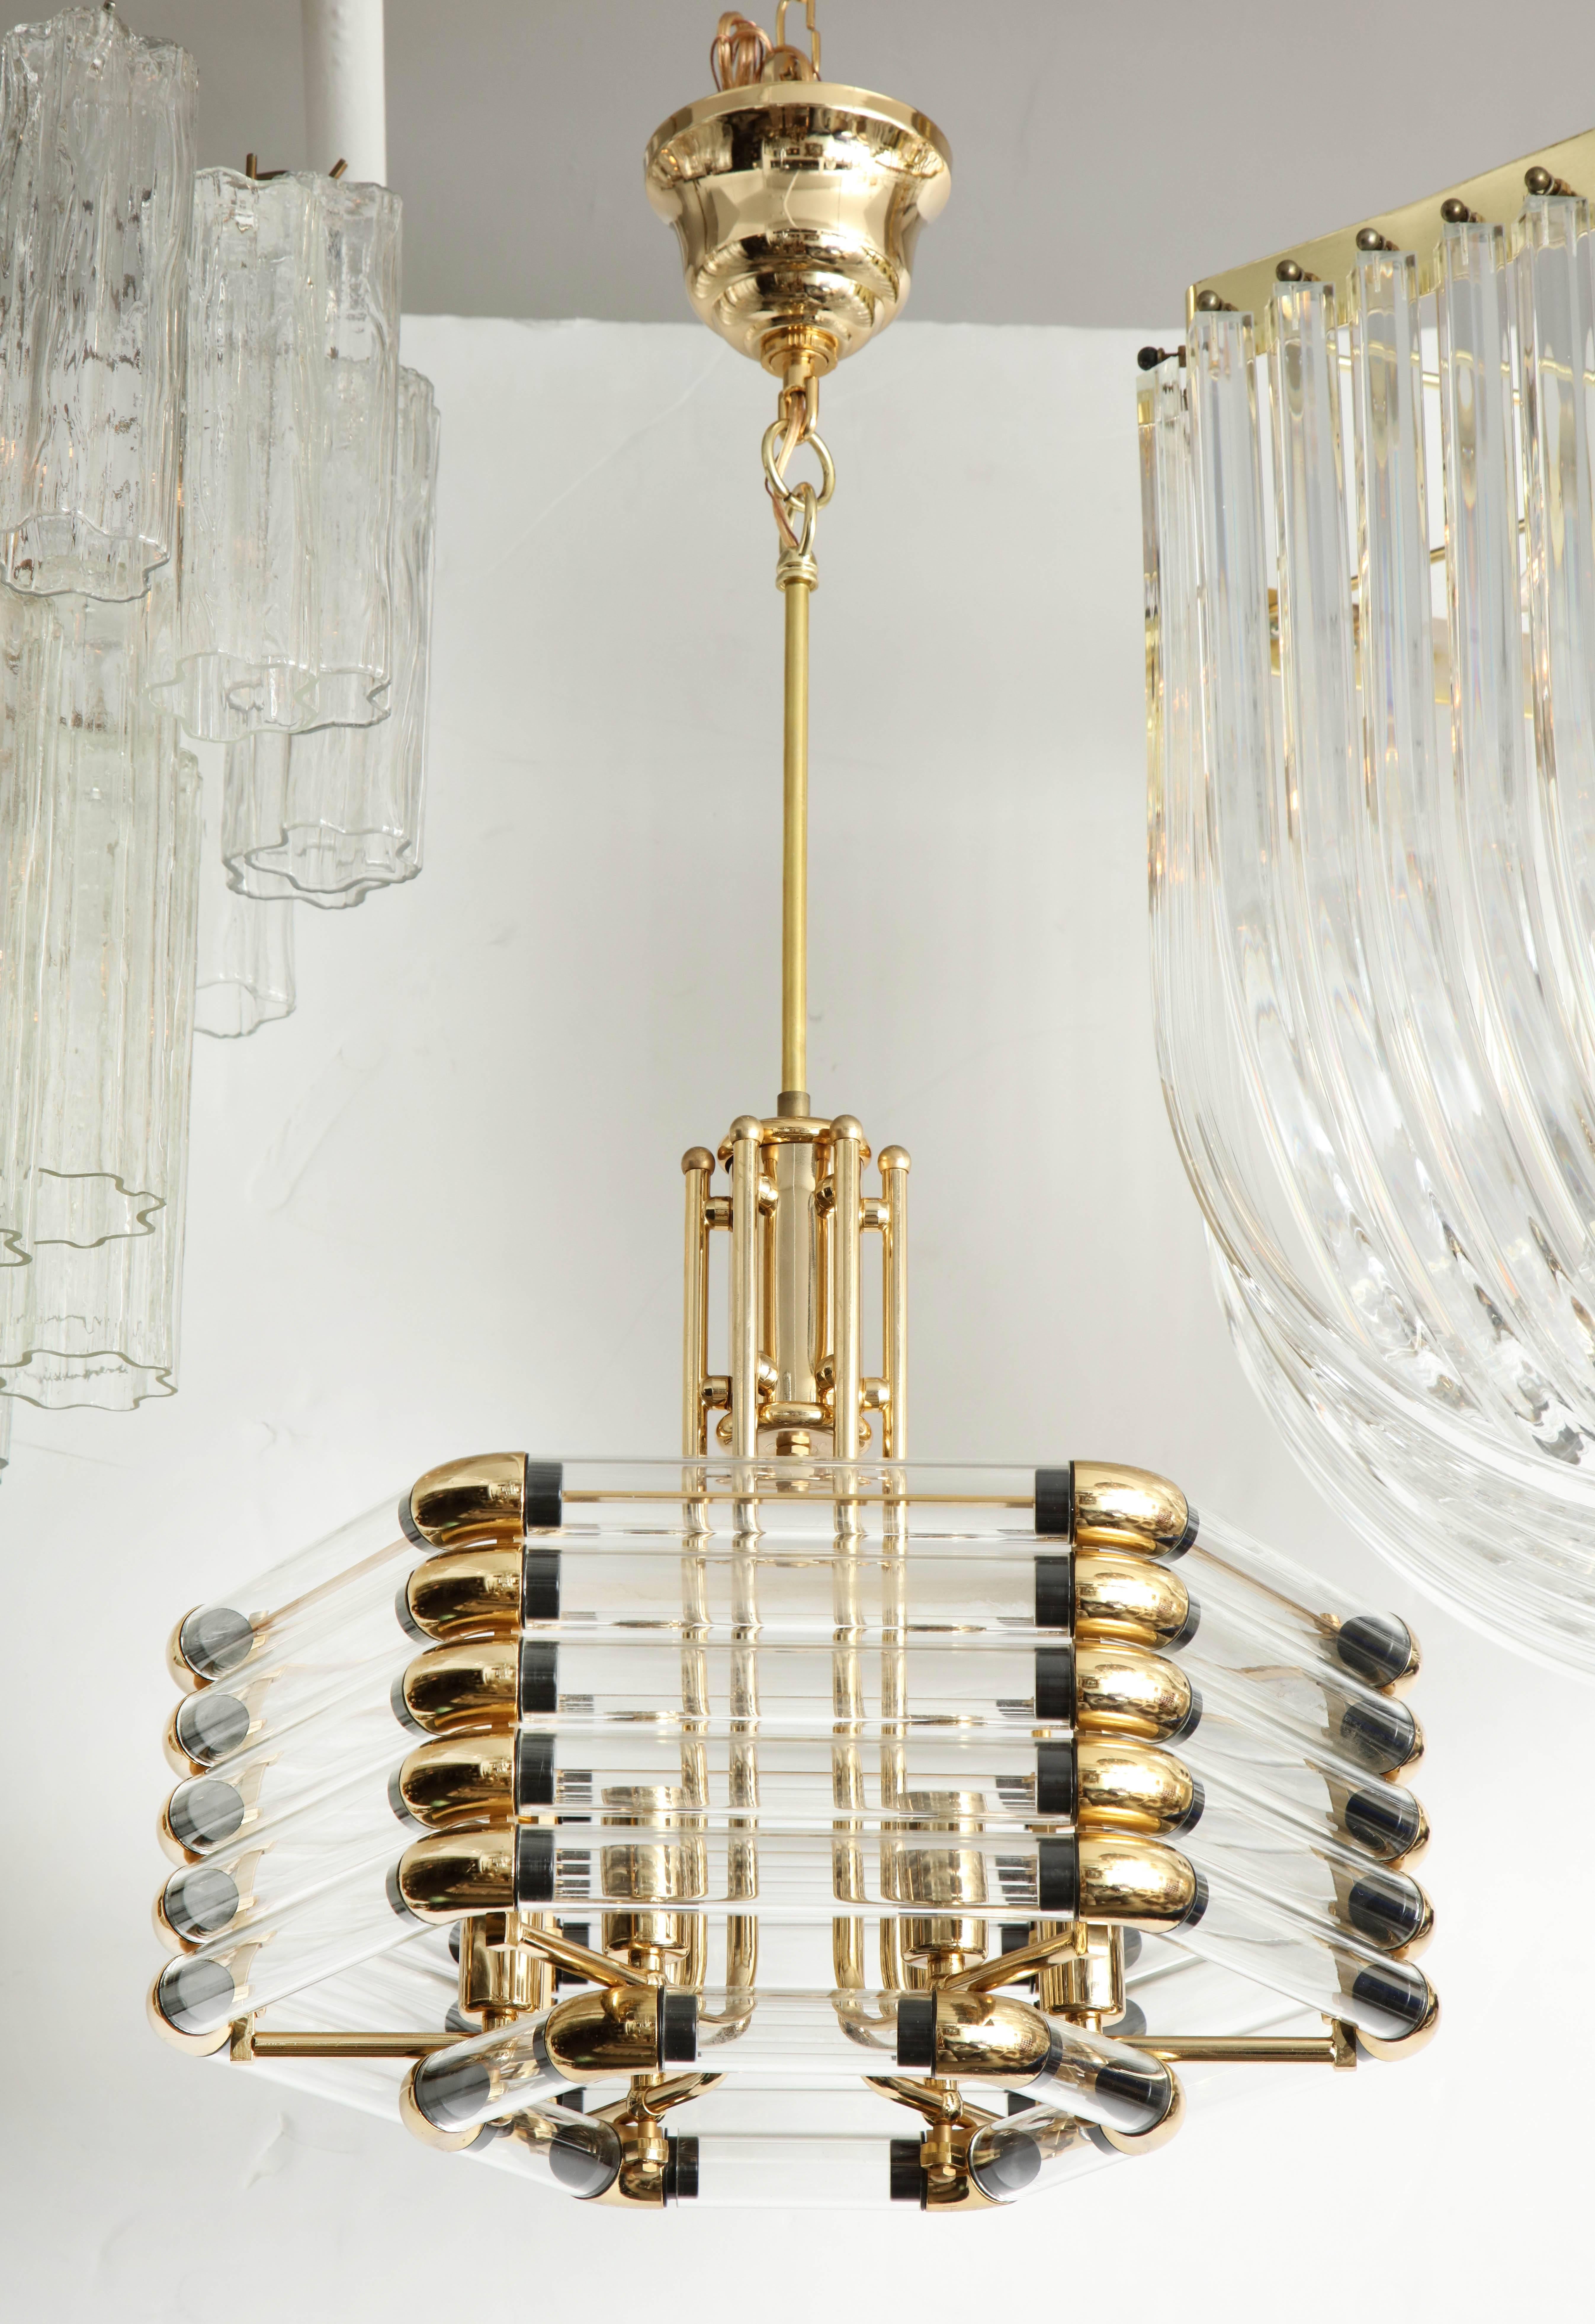 A beautiful glass and brass chandelier by Bakalowits and Sohne.
The hexagonal chandelier frame has clear glass tubes which are held by polished brass appointments, the fixture is illuminated by six-light sources that have been newly rewired for the